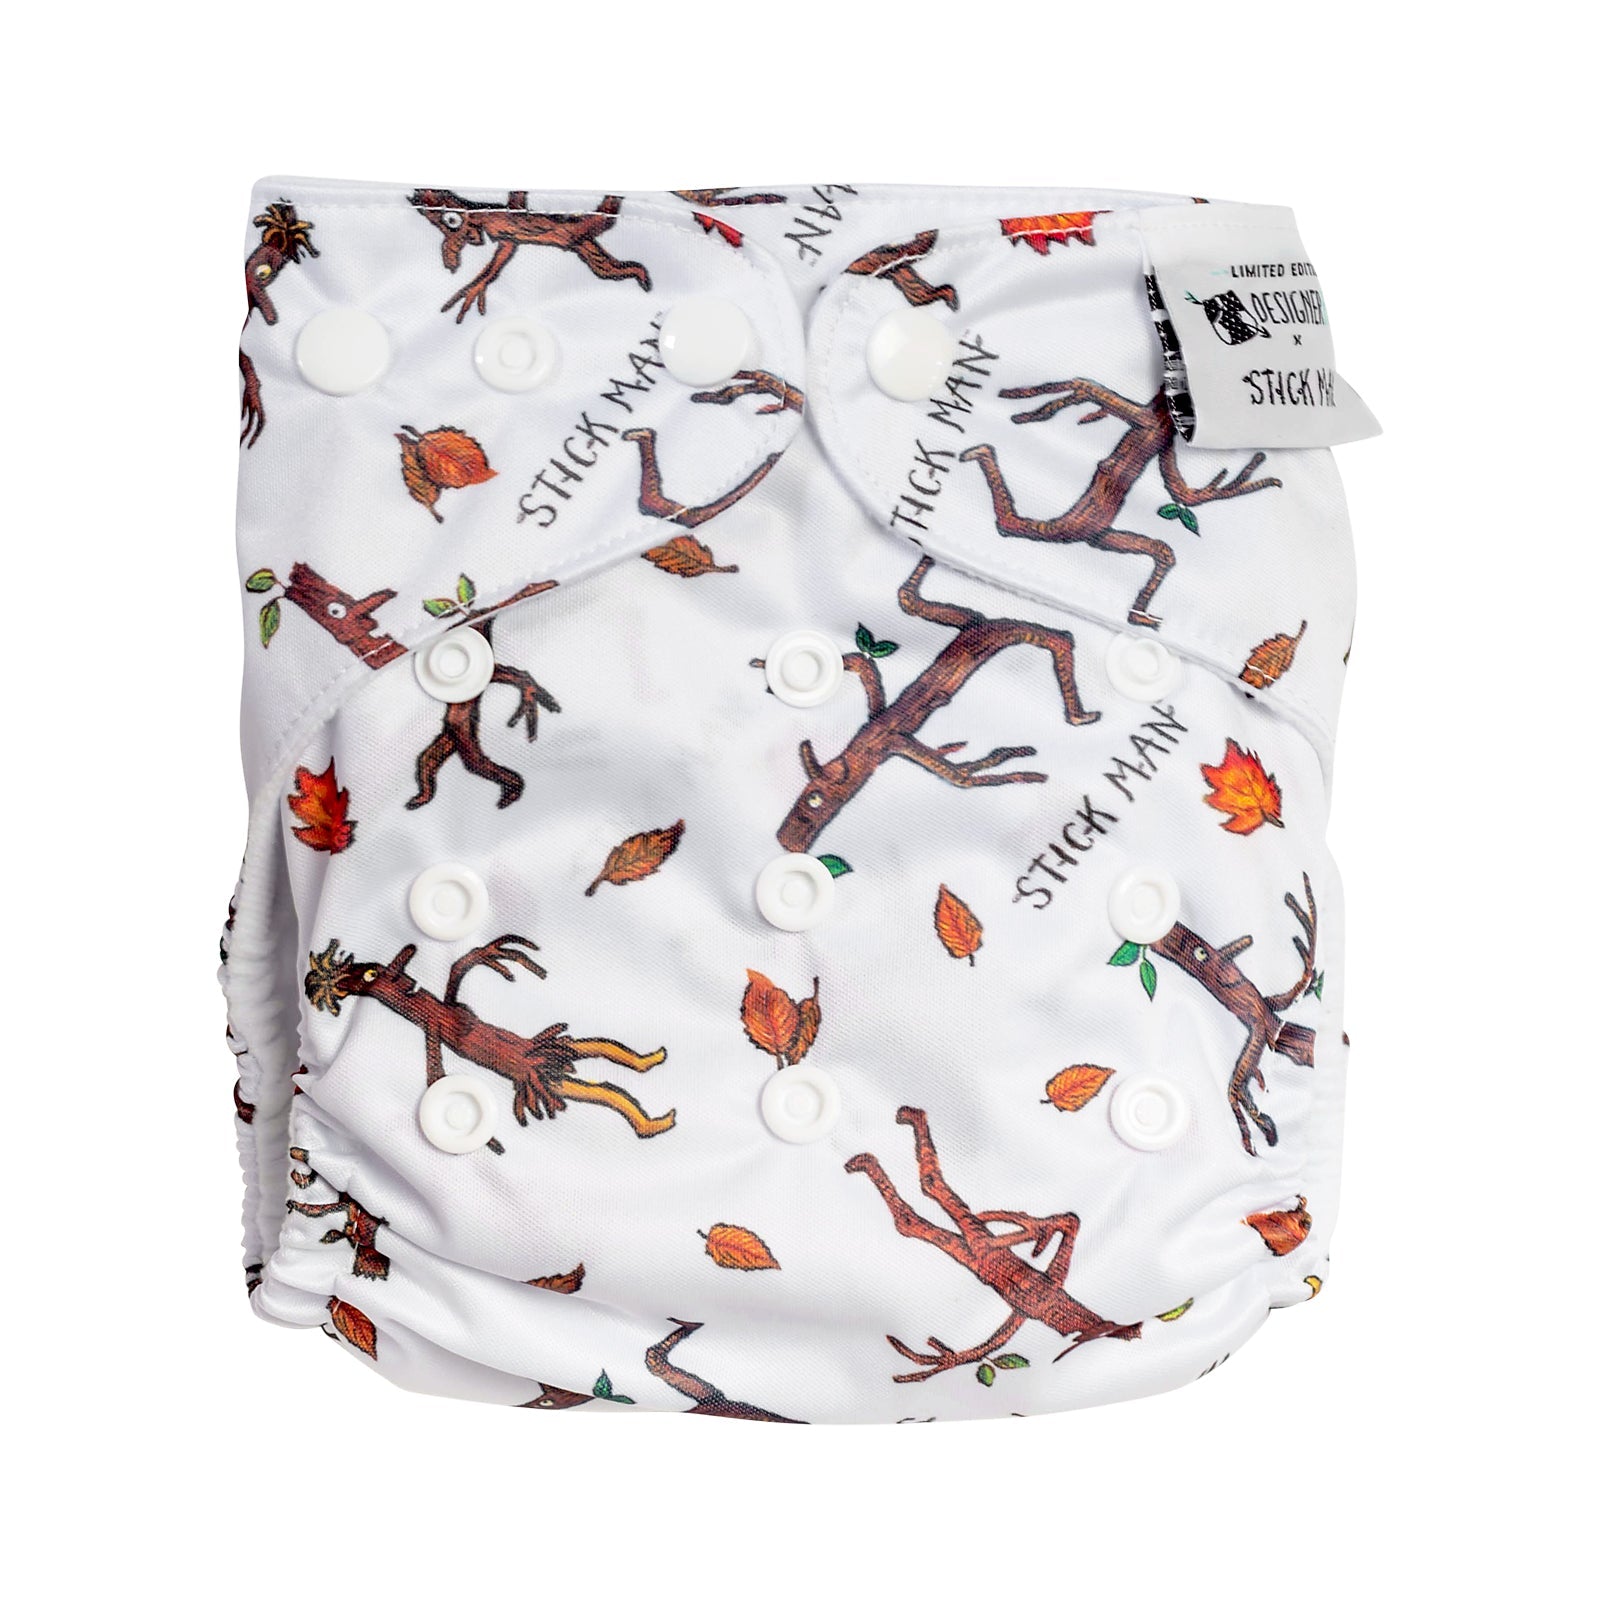 Stick Man And Stick Family Reusable Cloth Nappy